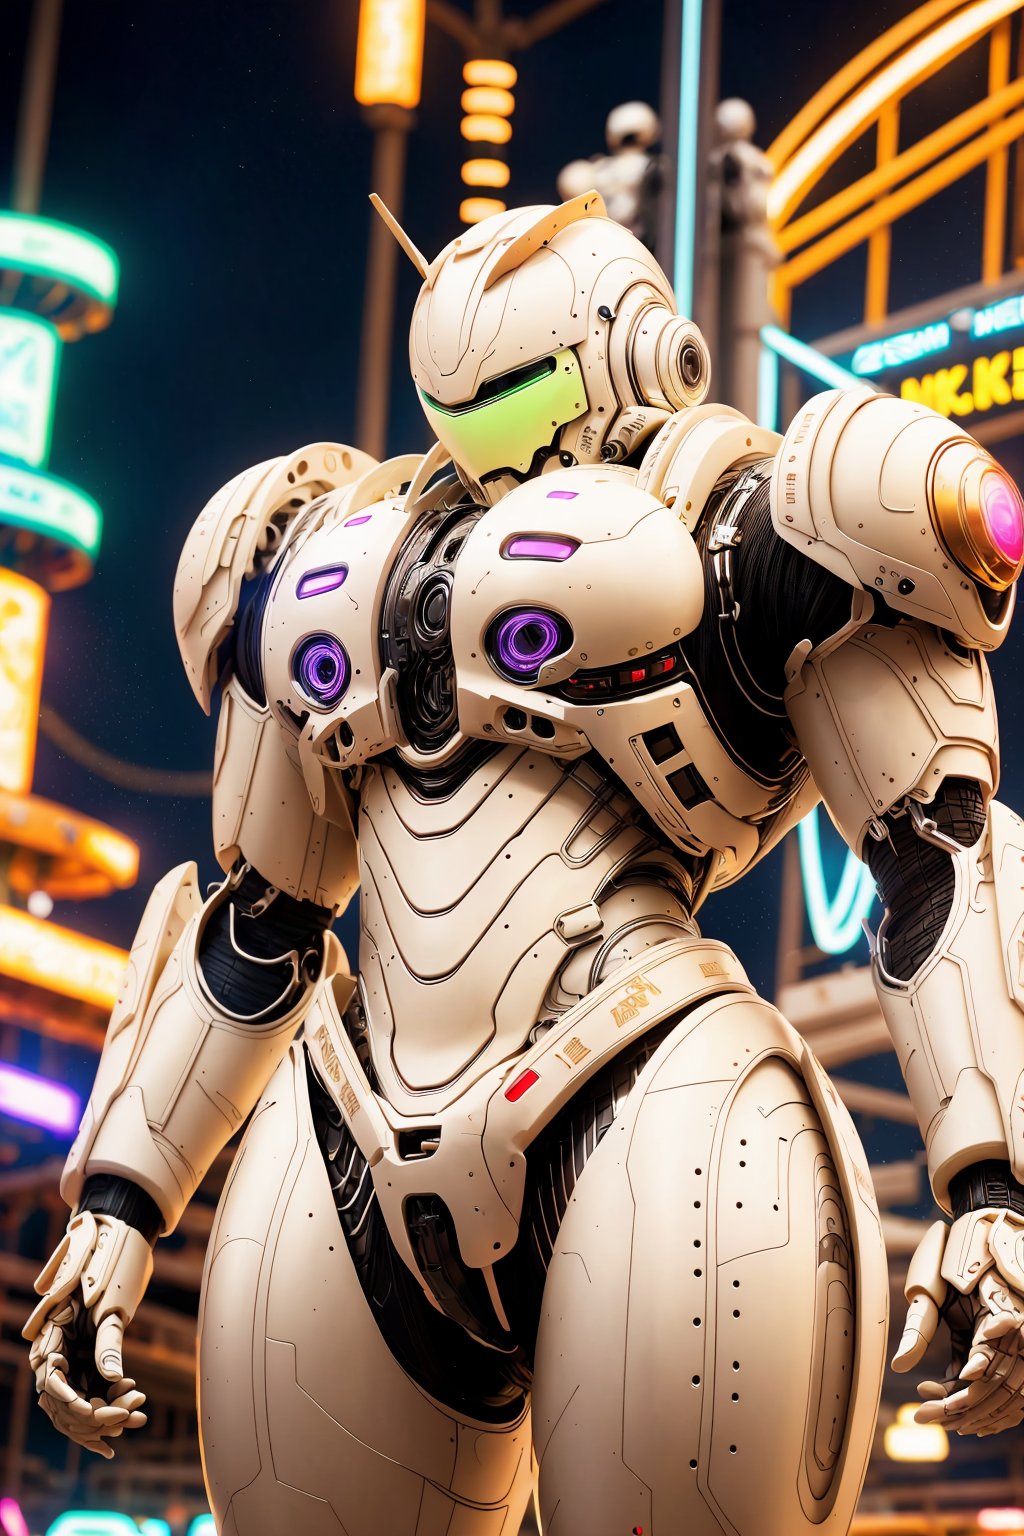 highly detailed 8k cinematic photo, full body view, (Cream zzmckzz:1.2), helmet, Neon-Lit Amusement Park Rides background with busy people, Using a Laptop, 35mm photograph, film, bokeh, professional <lora:zzmckzz v4:1>